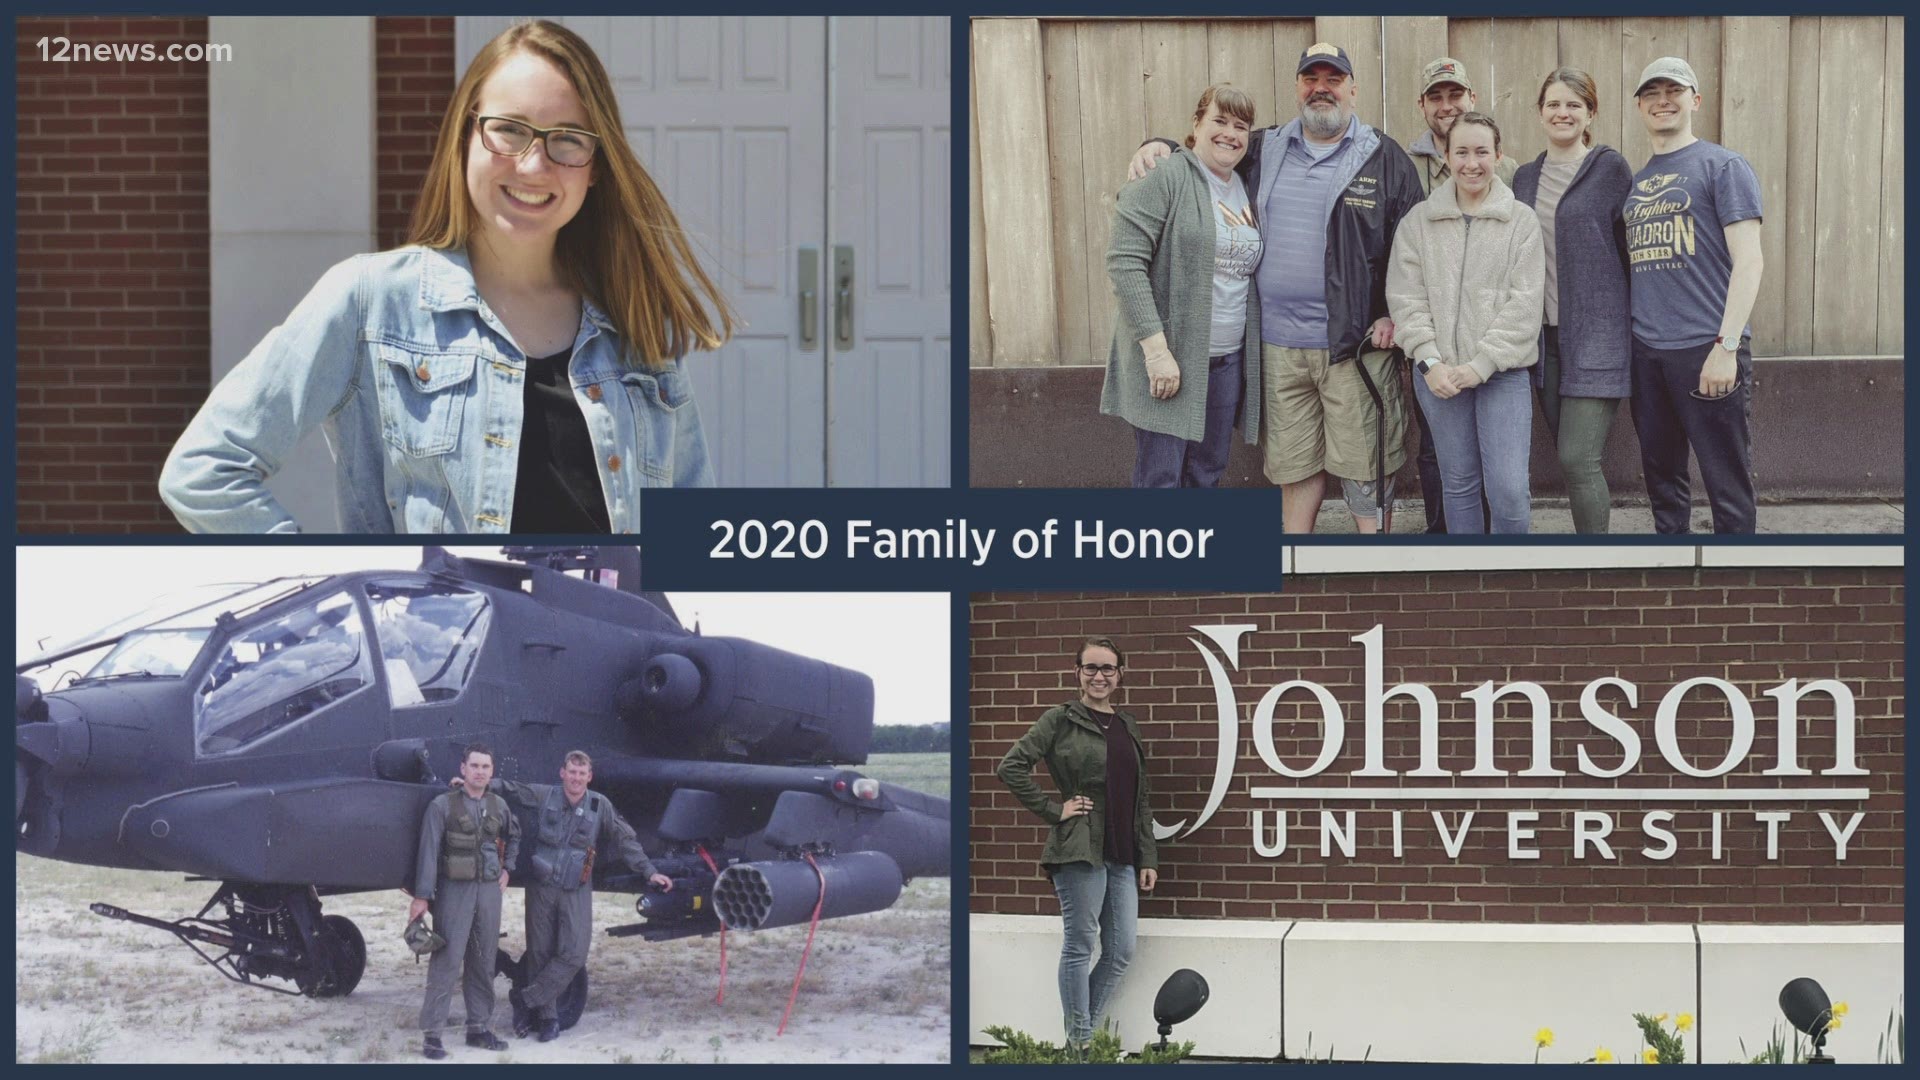 A Peoria family is being saluted as a National Military Family of Honor, after a nearly fatal helicopter crash in Afghanistan.